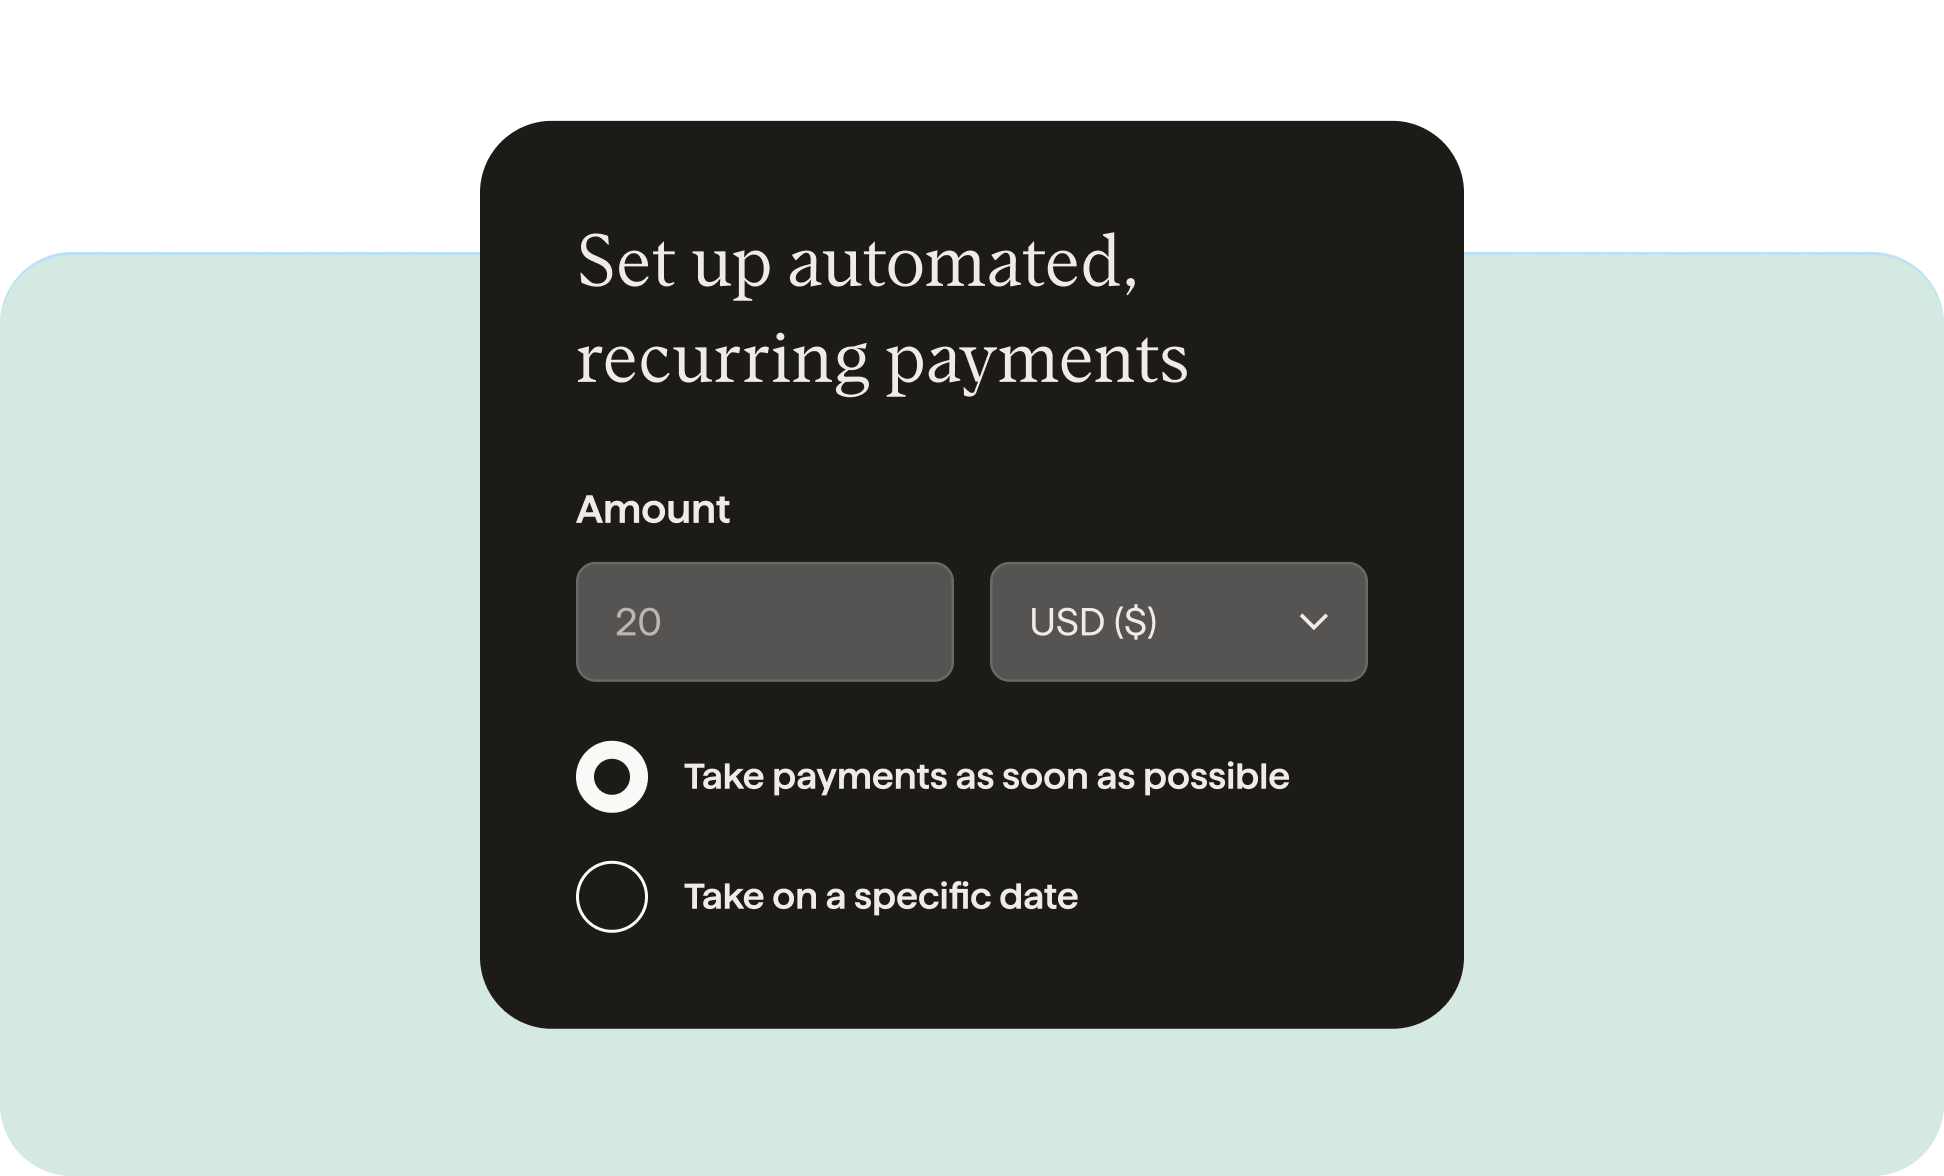 Invoice payments